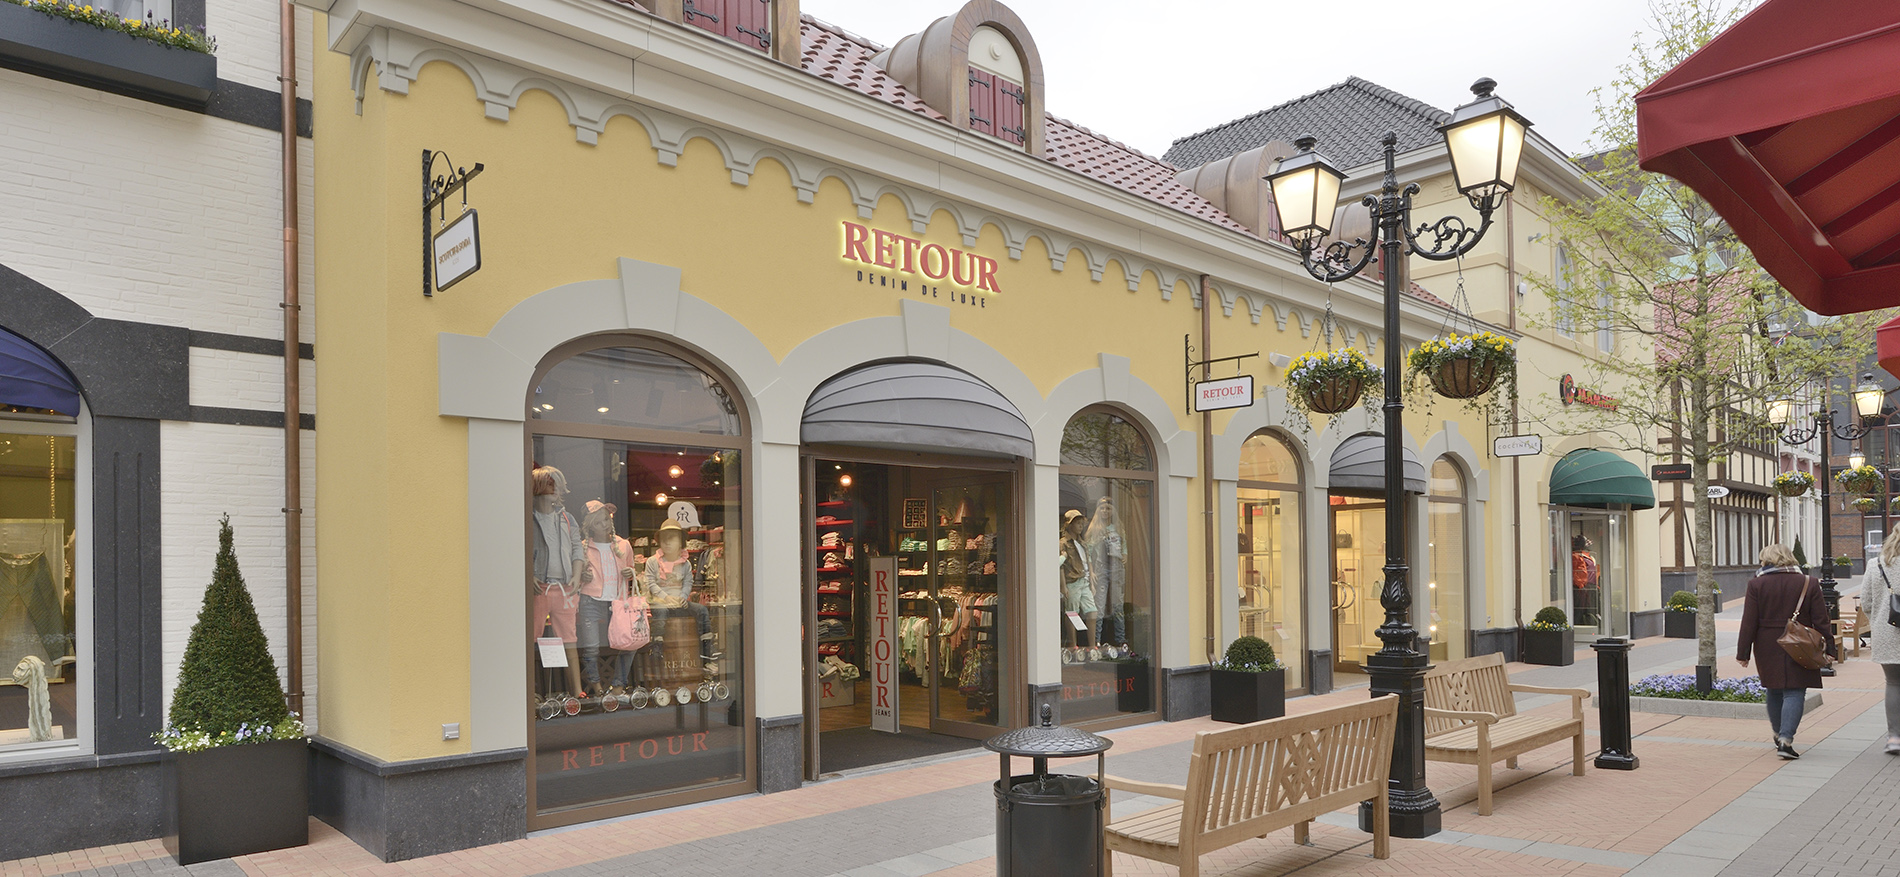 Outlet Center Roermond has gained an appealing store concept